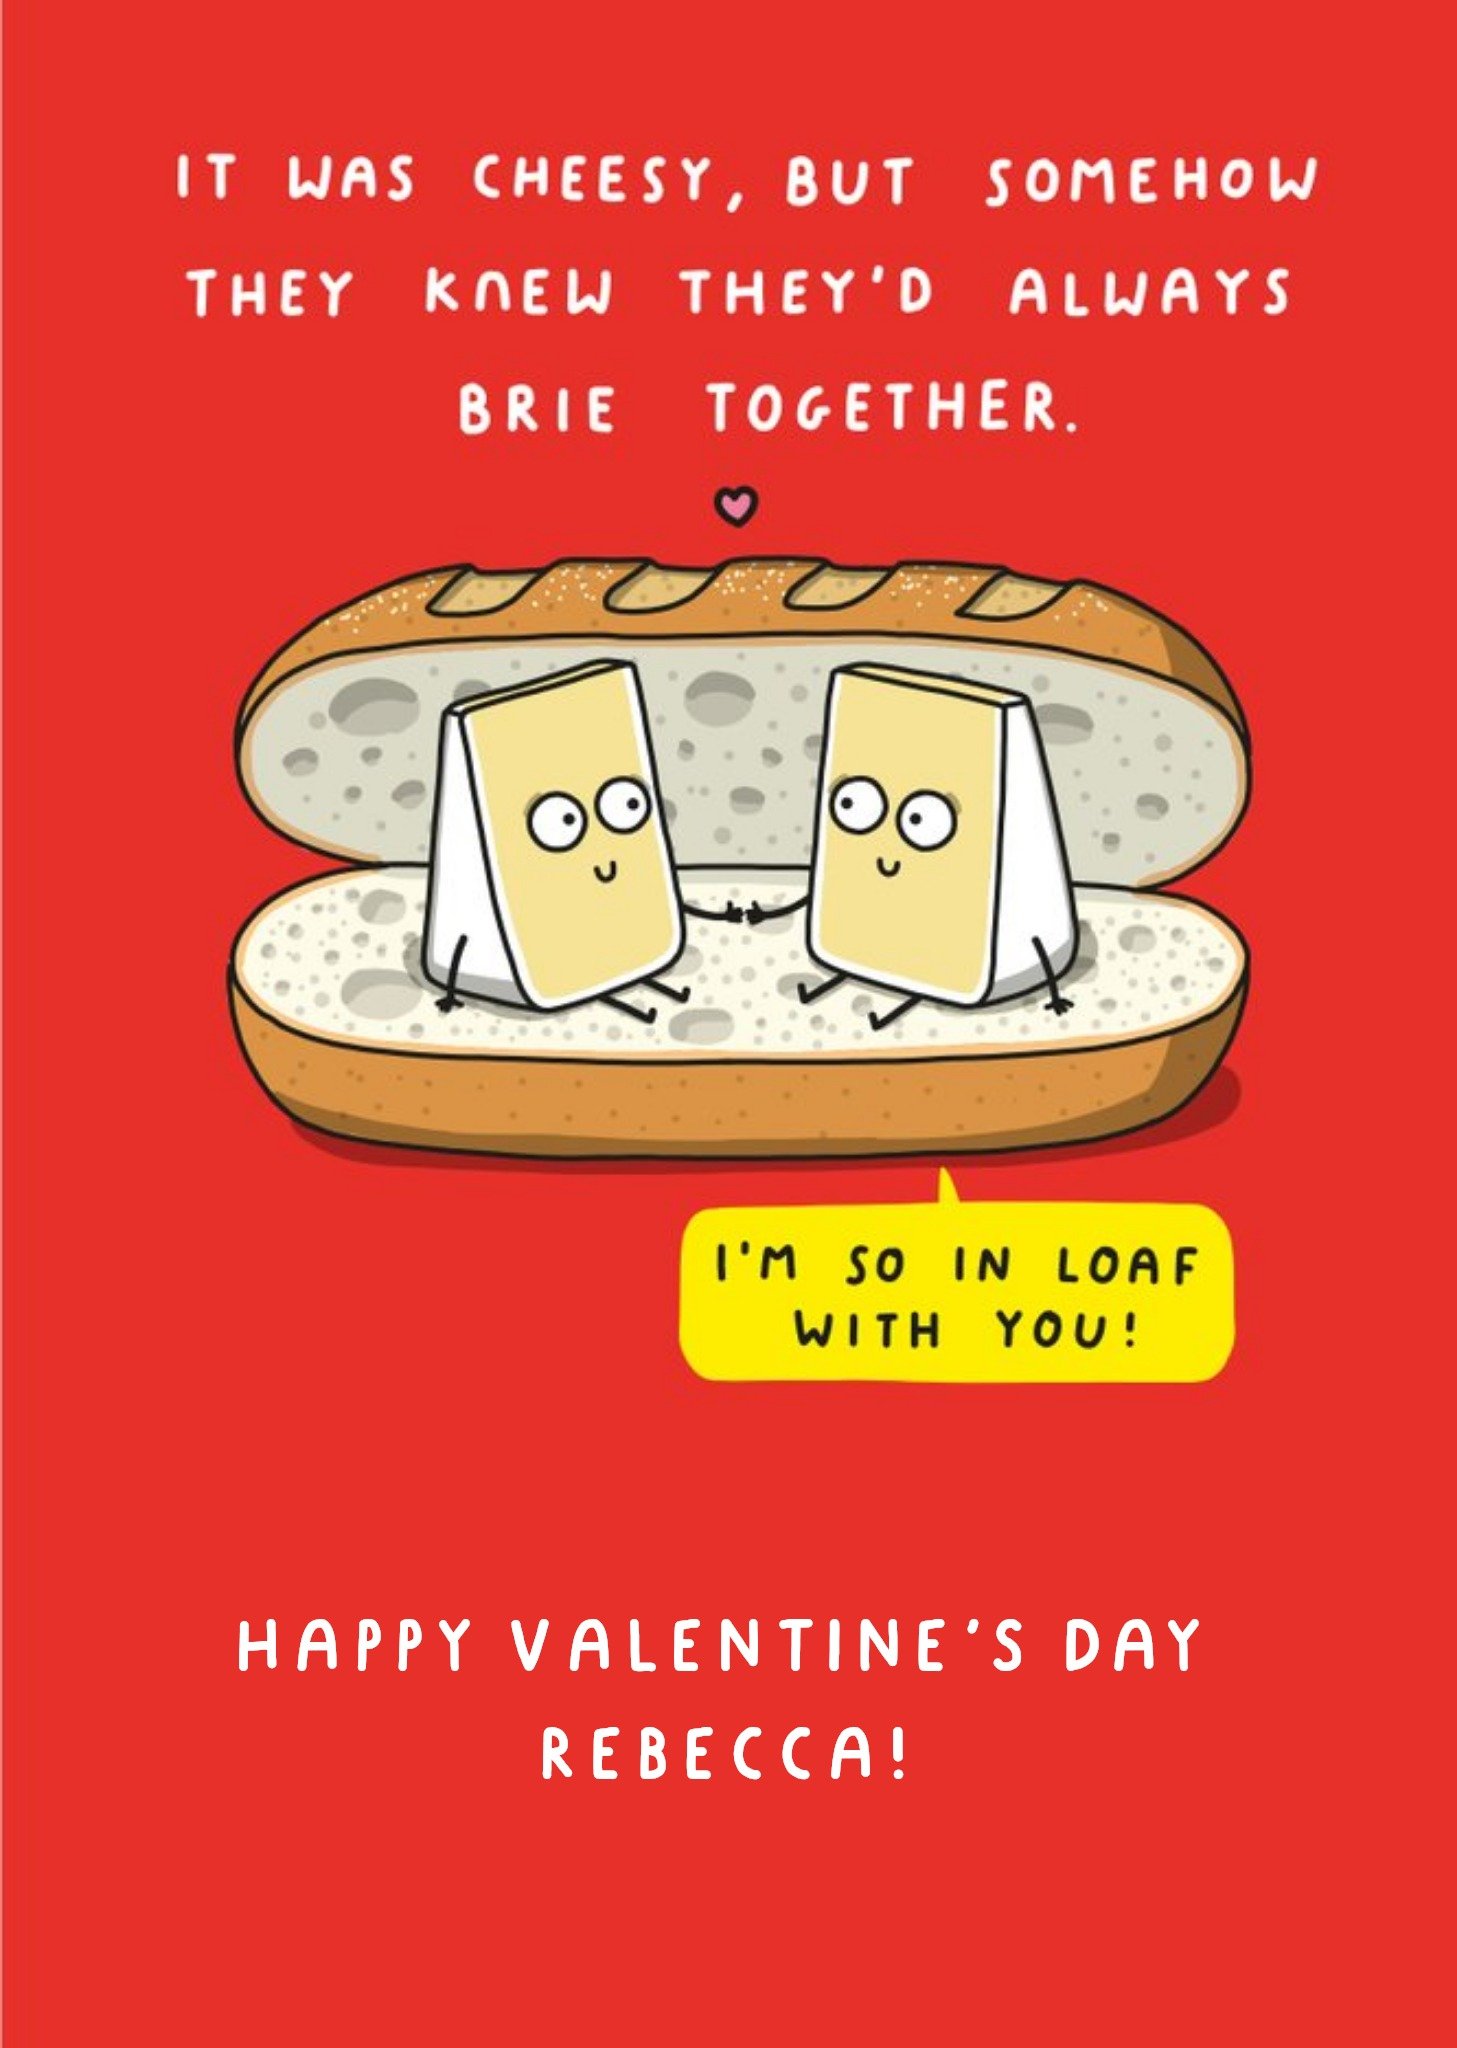 Other Mungo And Shoddy Cheesy Brie Together Funny Valentine's Day Card Ecard